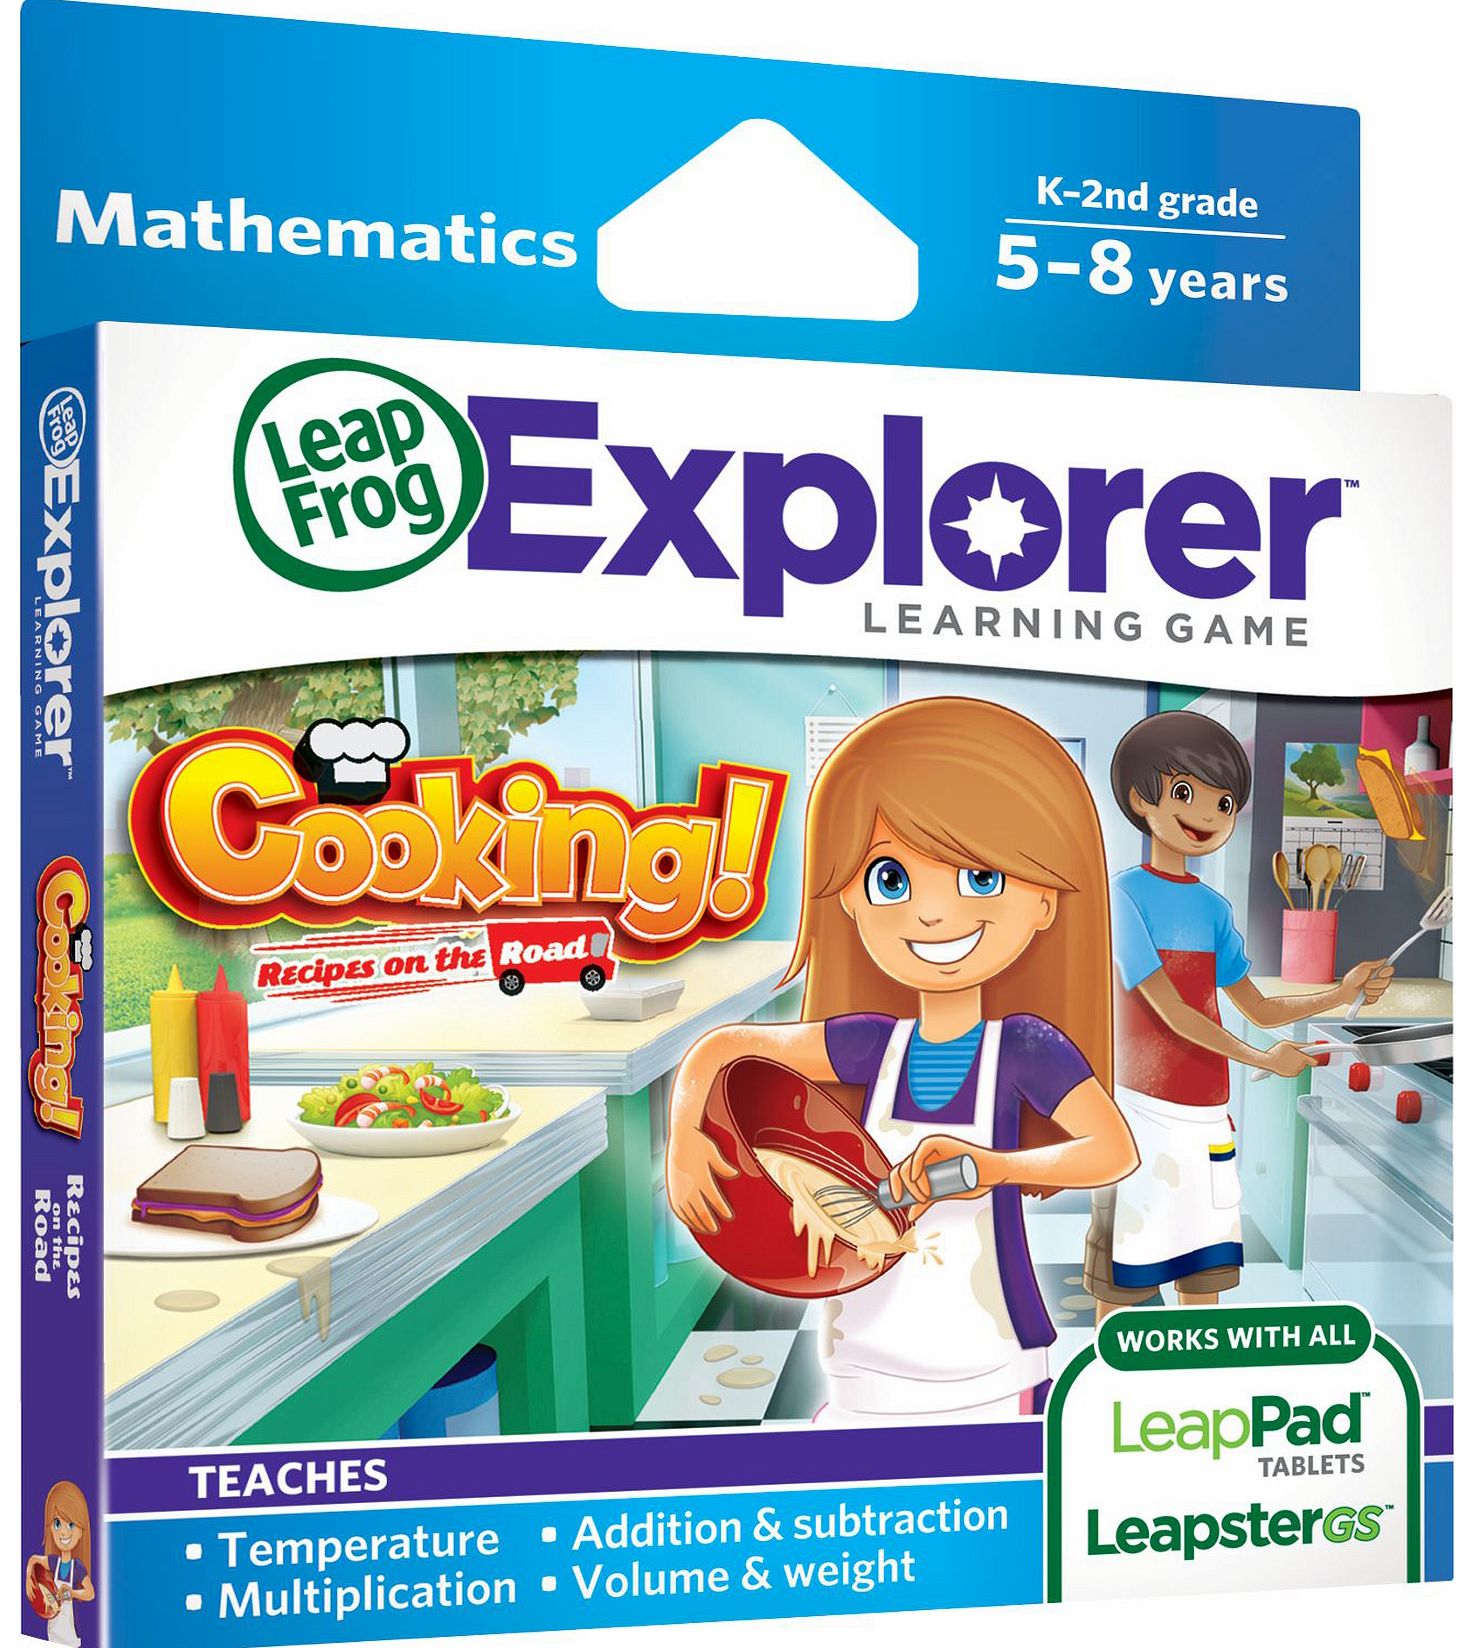 LeapFrog Explorer Learning Game - Cooking! Recipes on the